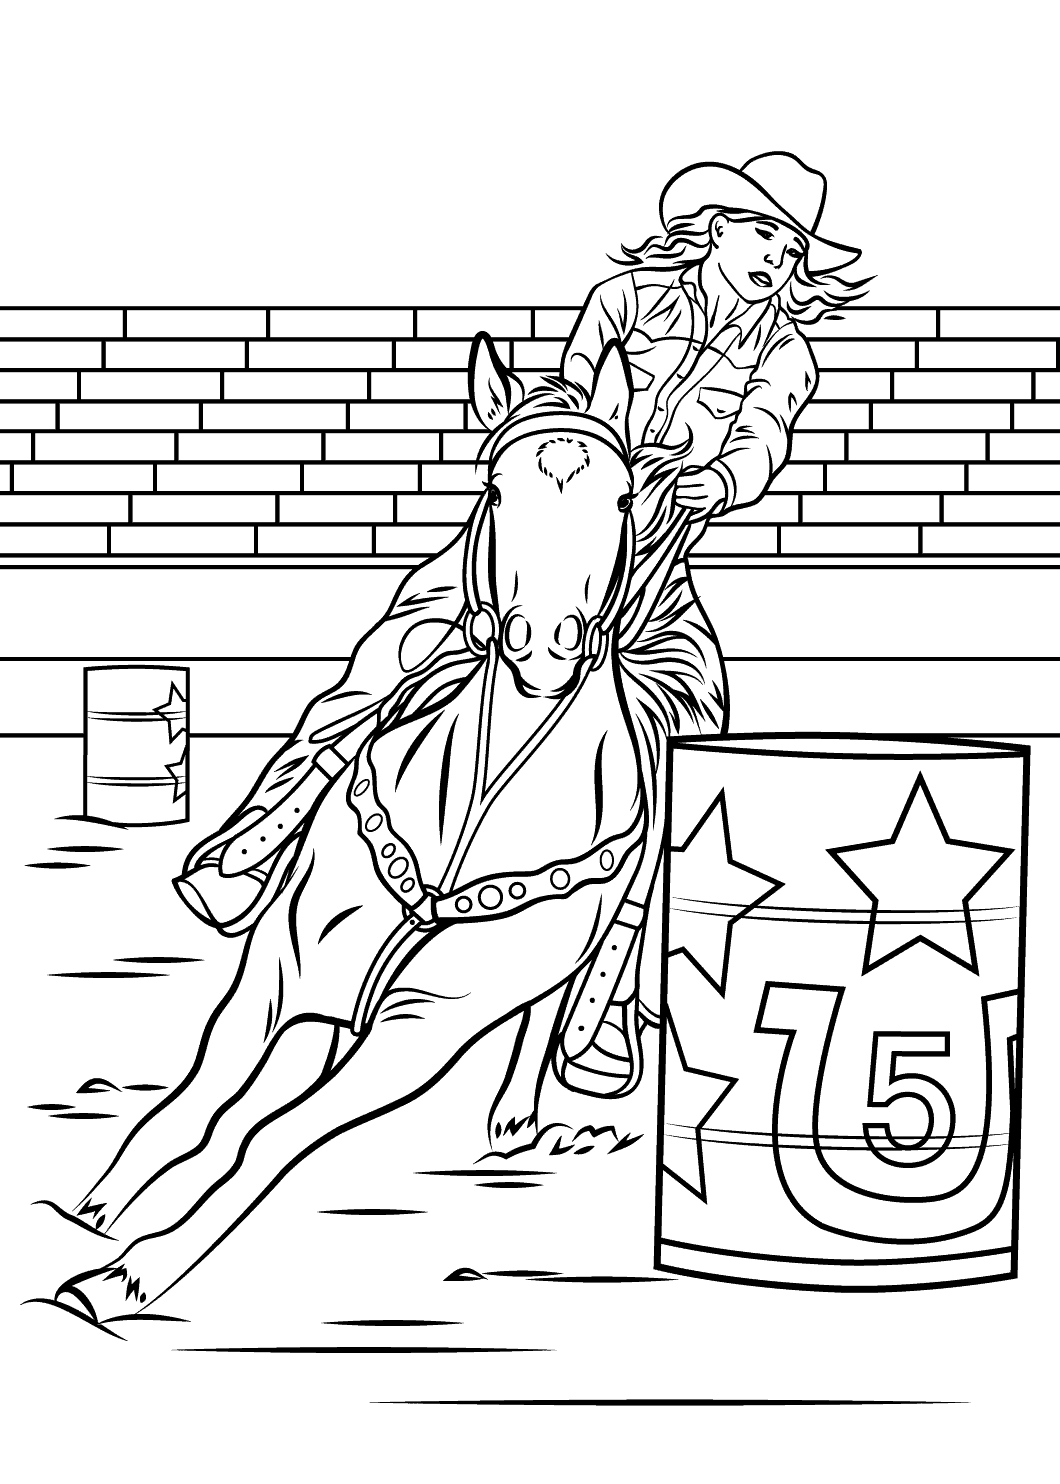 horse barrel racing coloring pages